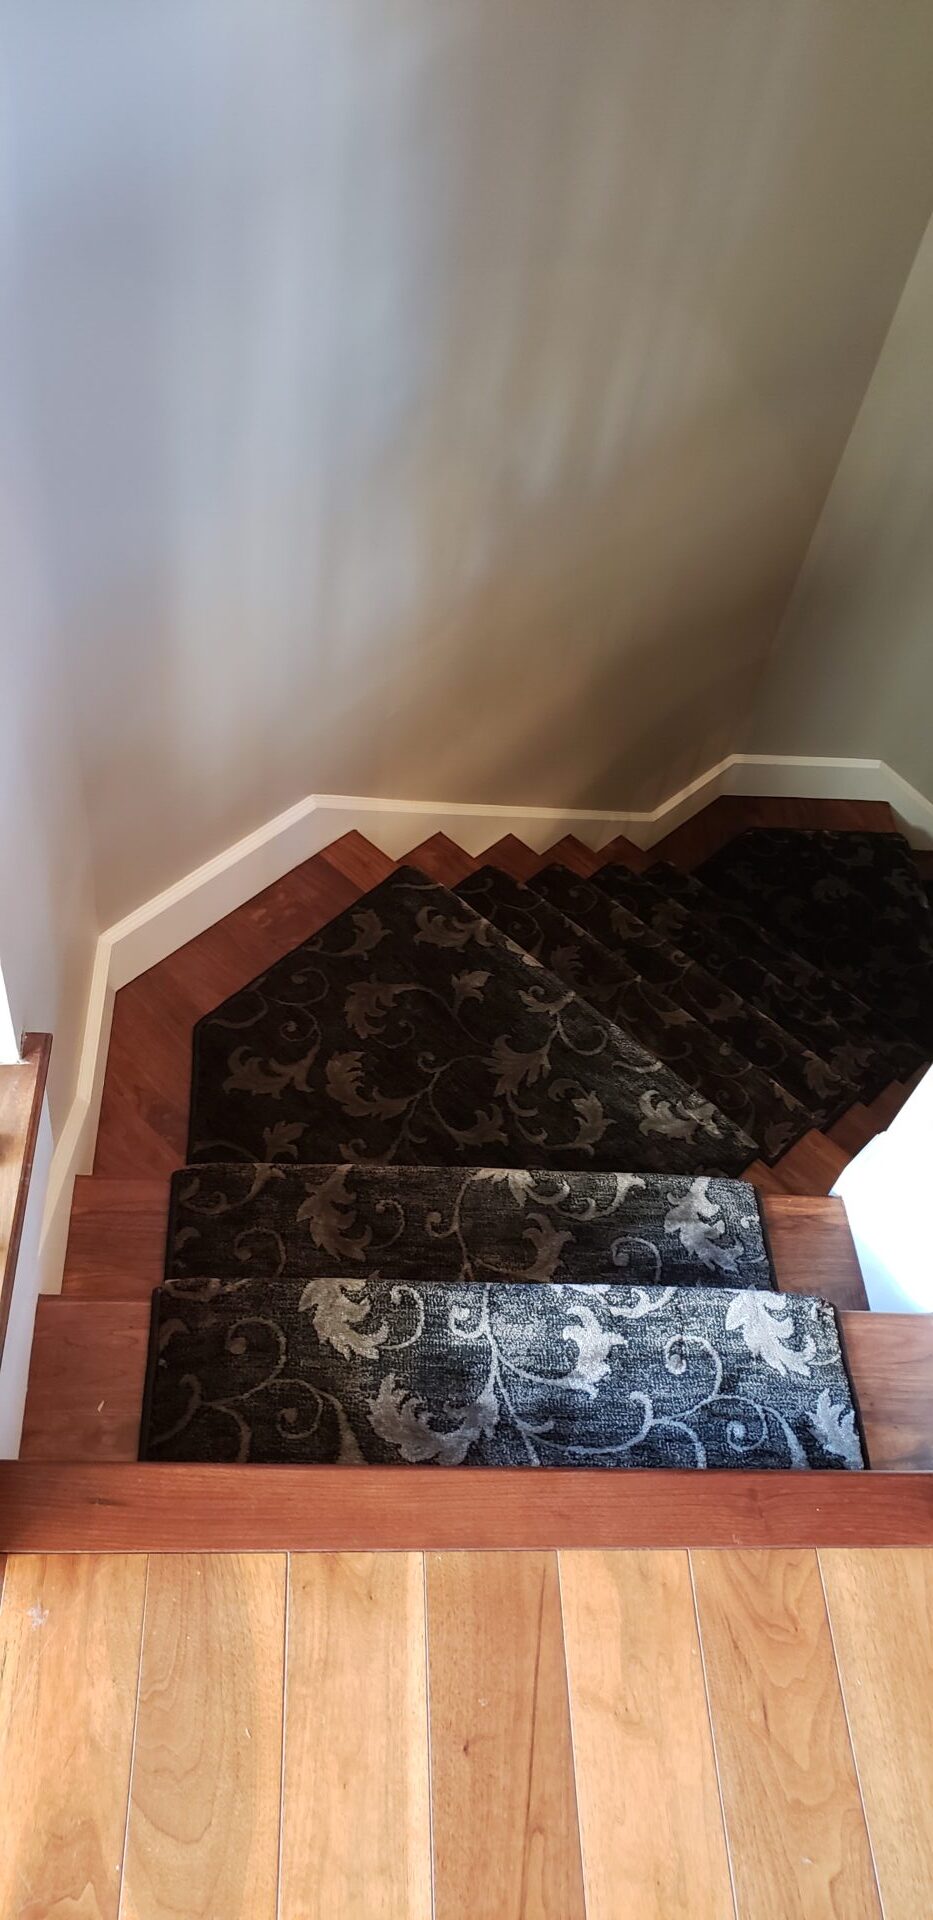 A staircase with black and white carpet on the bottom of each step.